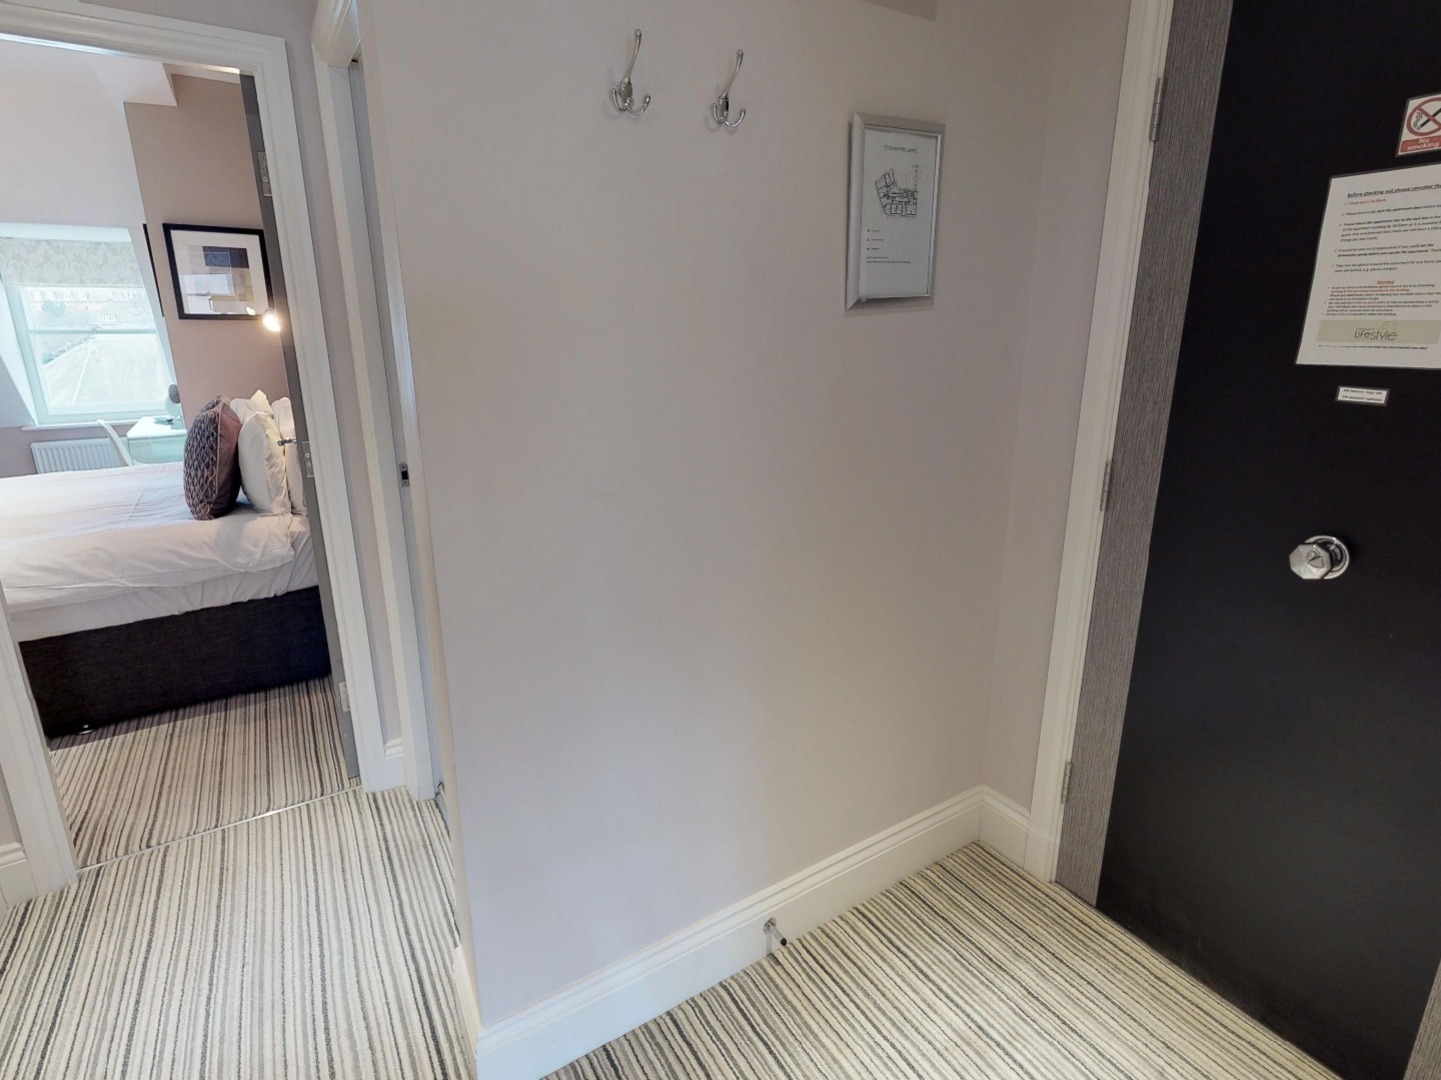 Executive two bedroom two bathroom apartment to rent in Harrogate town centre north yorkshire hotel alternative